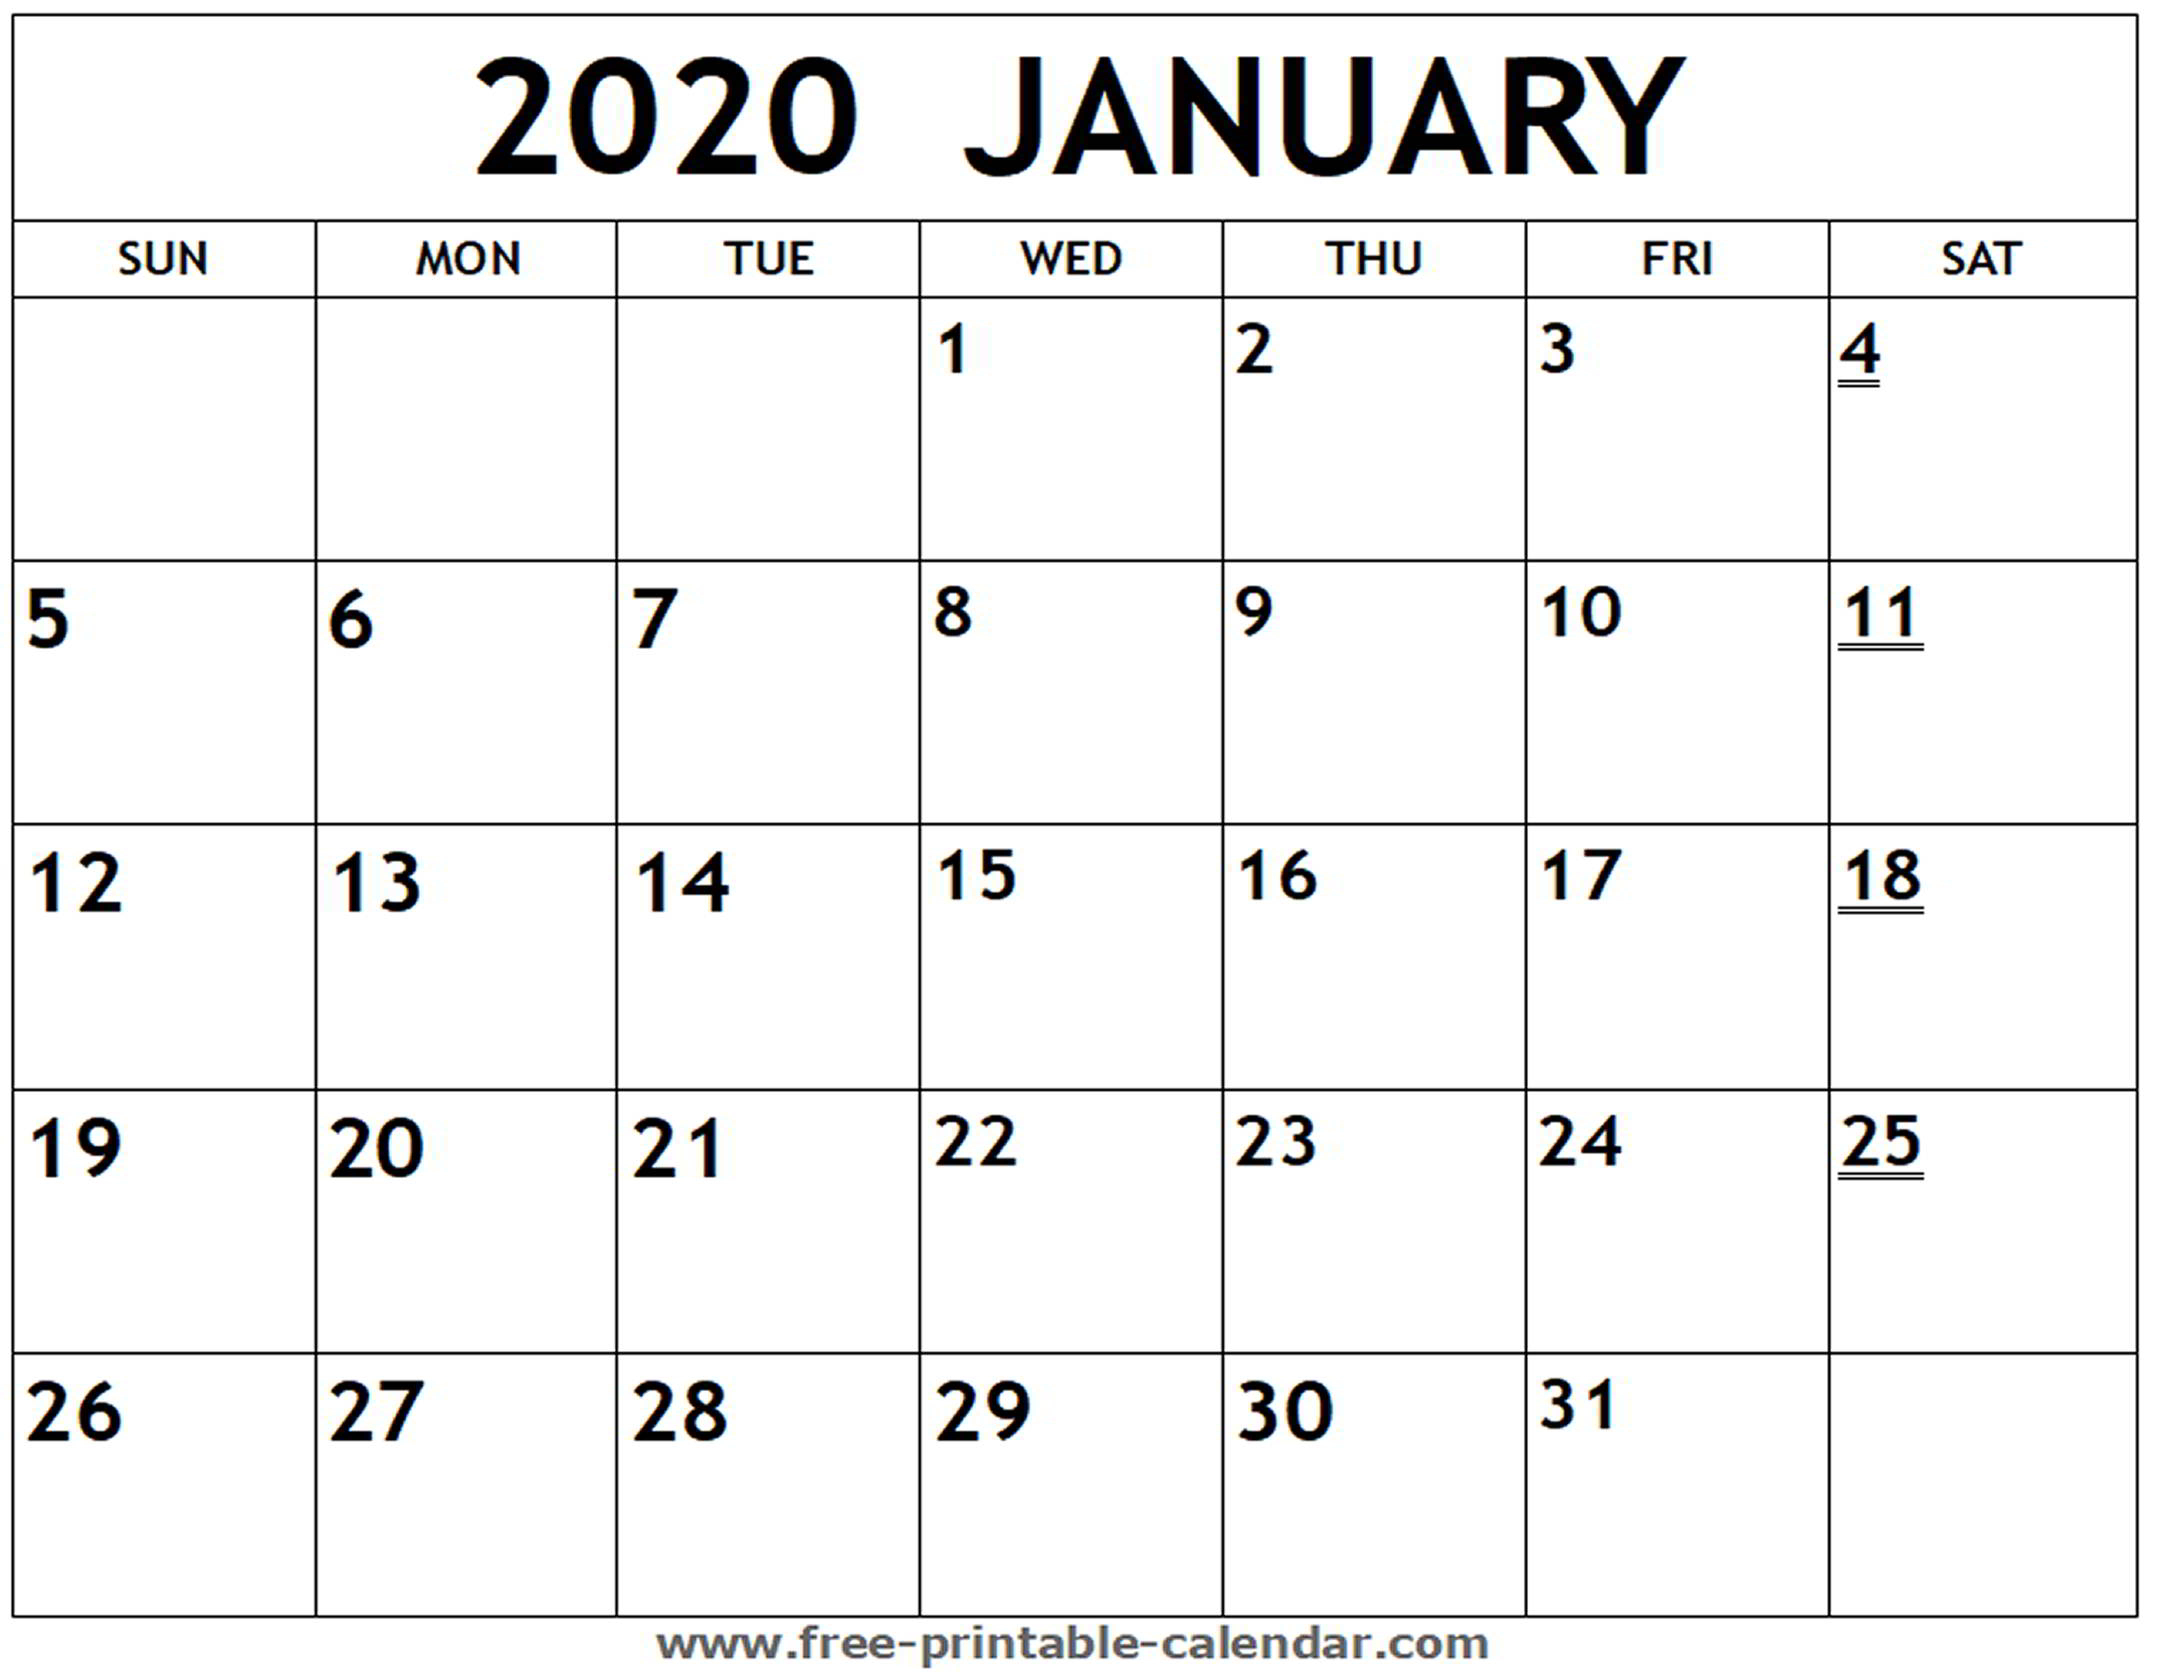 January Monthly Calendar 2020  Bolan.horizonconsulting.co with Monthly Calendar 2020 Printable